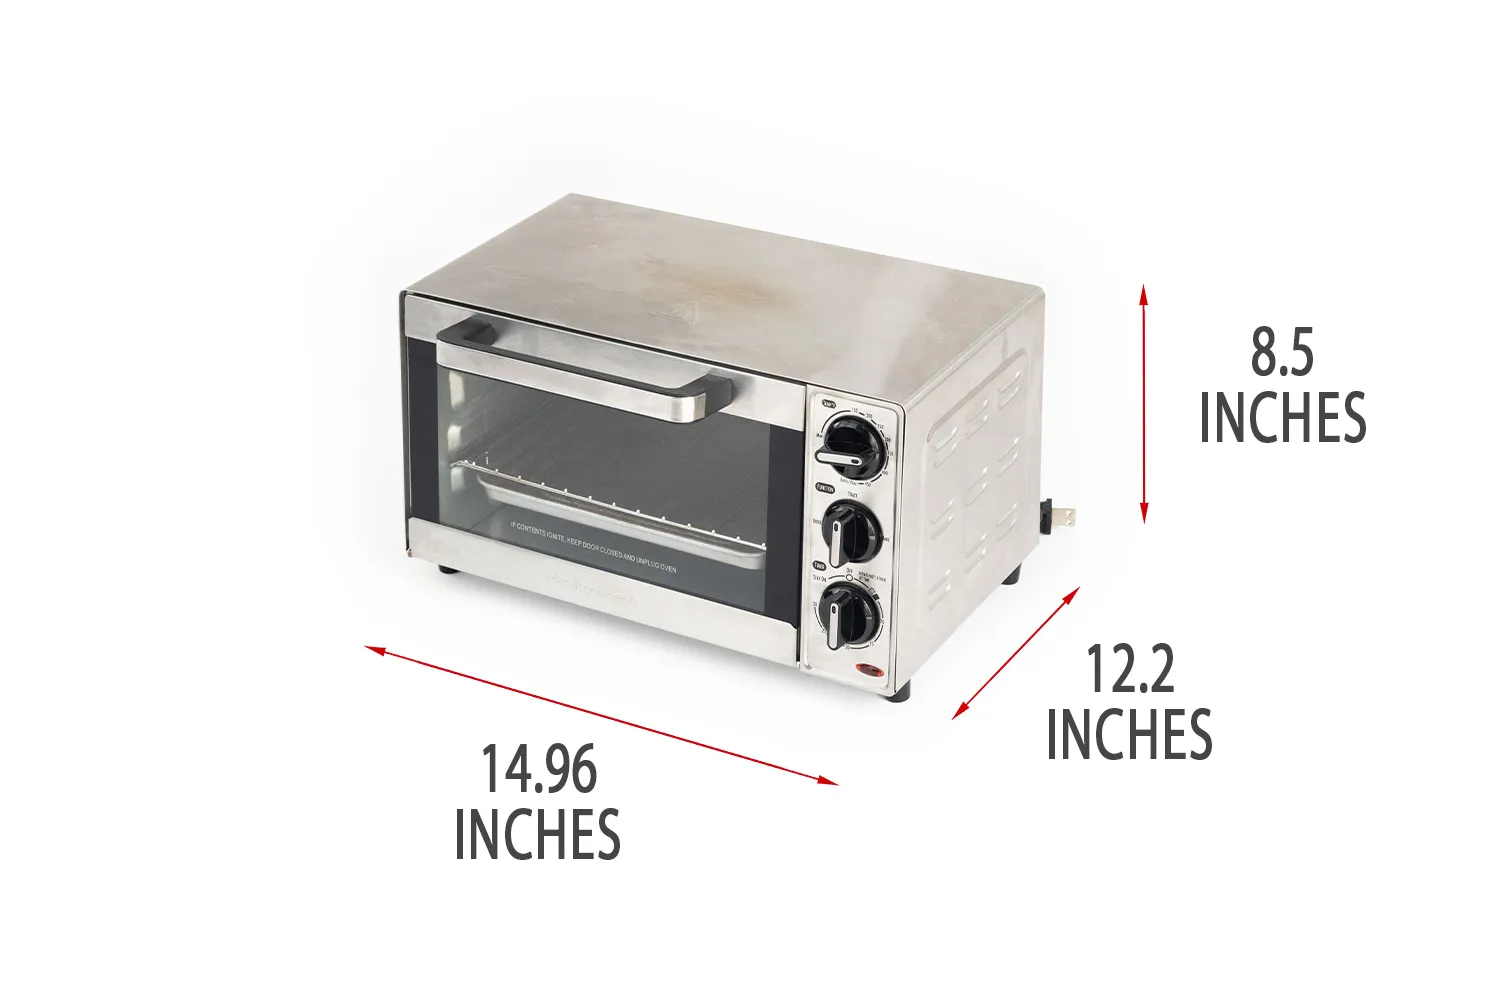  Hamilton Beach Countertop Toaster Oven & Pizza Maker Large 4- Slice Capacity, Stainless Steel (31401): Home & Kitchen